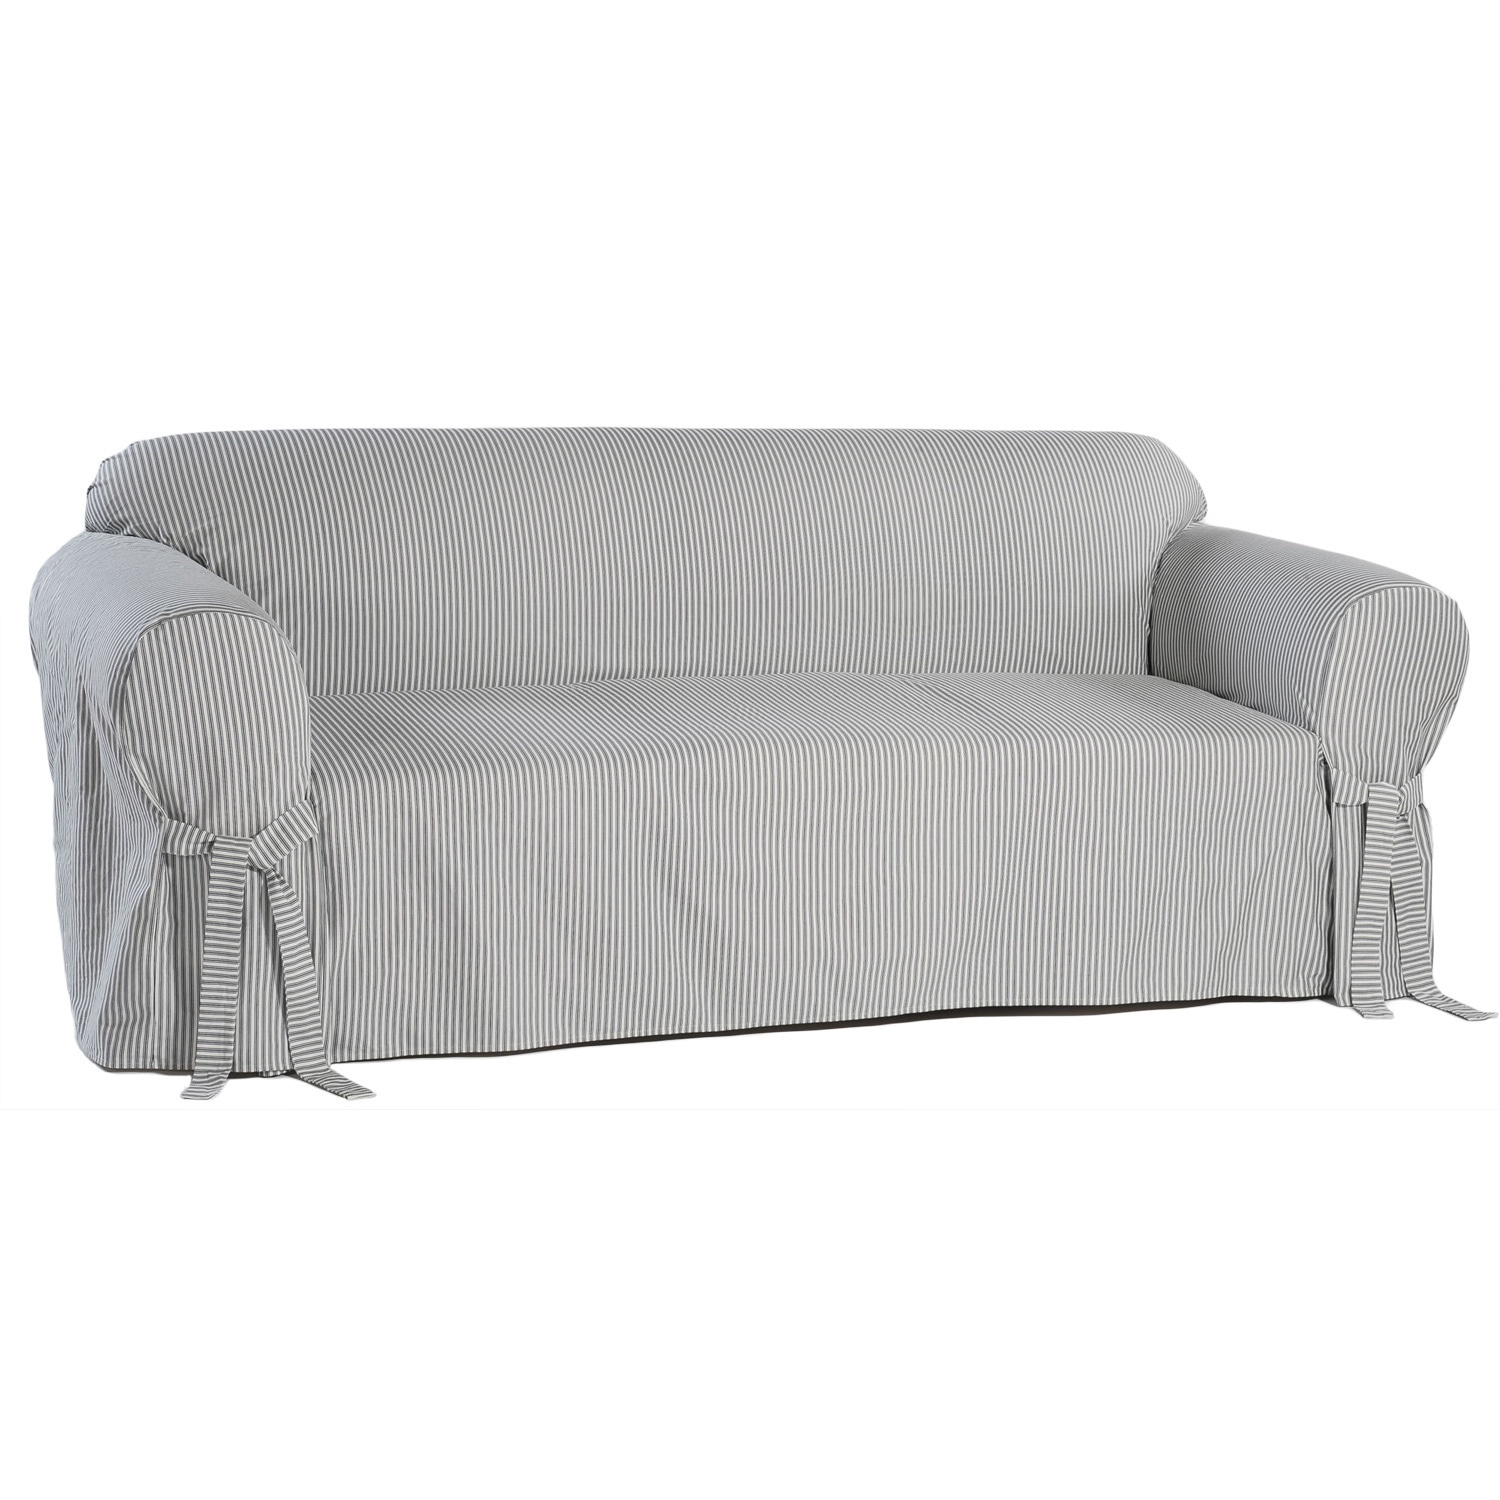 Shop Classic Slipcovers Brushed Twill Sofa Slipcover Free